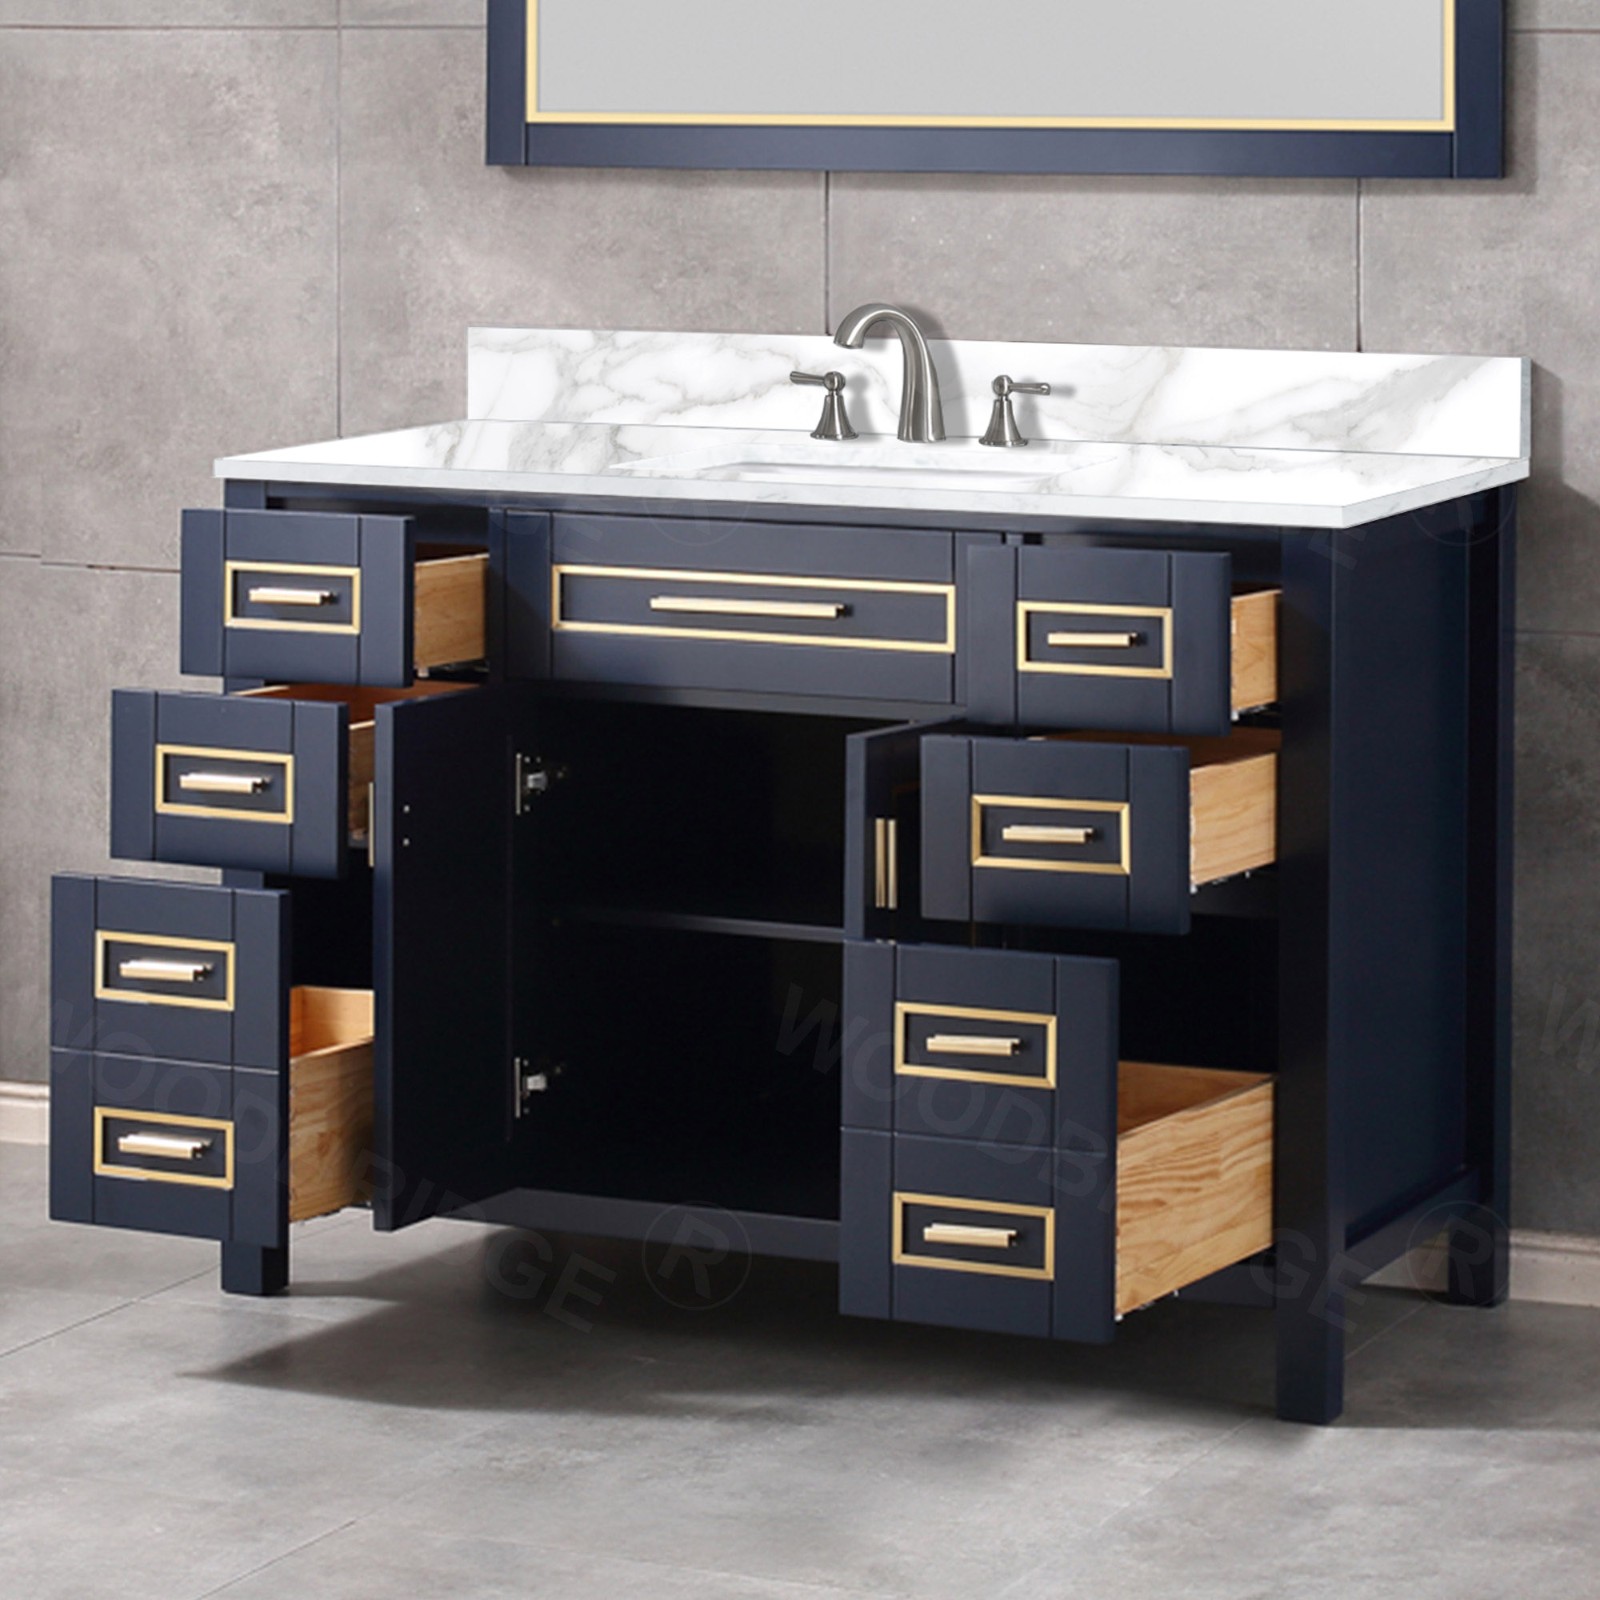  WOODBRIDGE Milan  49” Floor Mounted Single Basin Vanity Set with Solid Wood Cabinet in Navy Blue and Engineered stone composite Vanity Top in Fish Belly White with Pre-installed Undermount Rectangle Bathroom Sink and Pre-Drilled 3-Hole for 4” Centerset Fa_4719